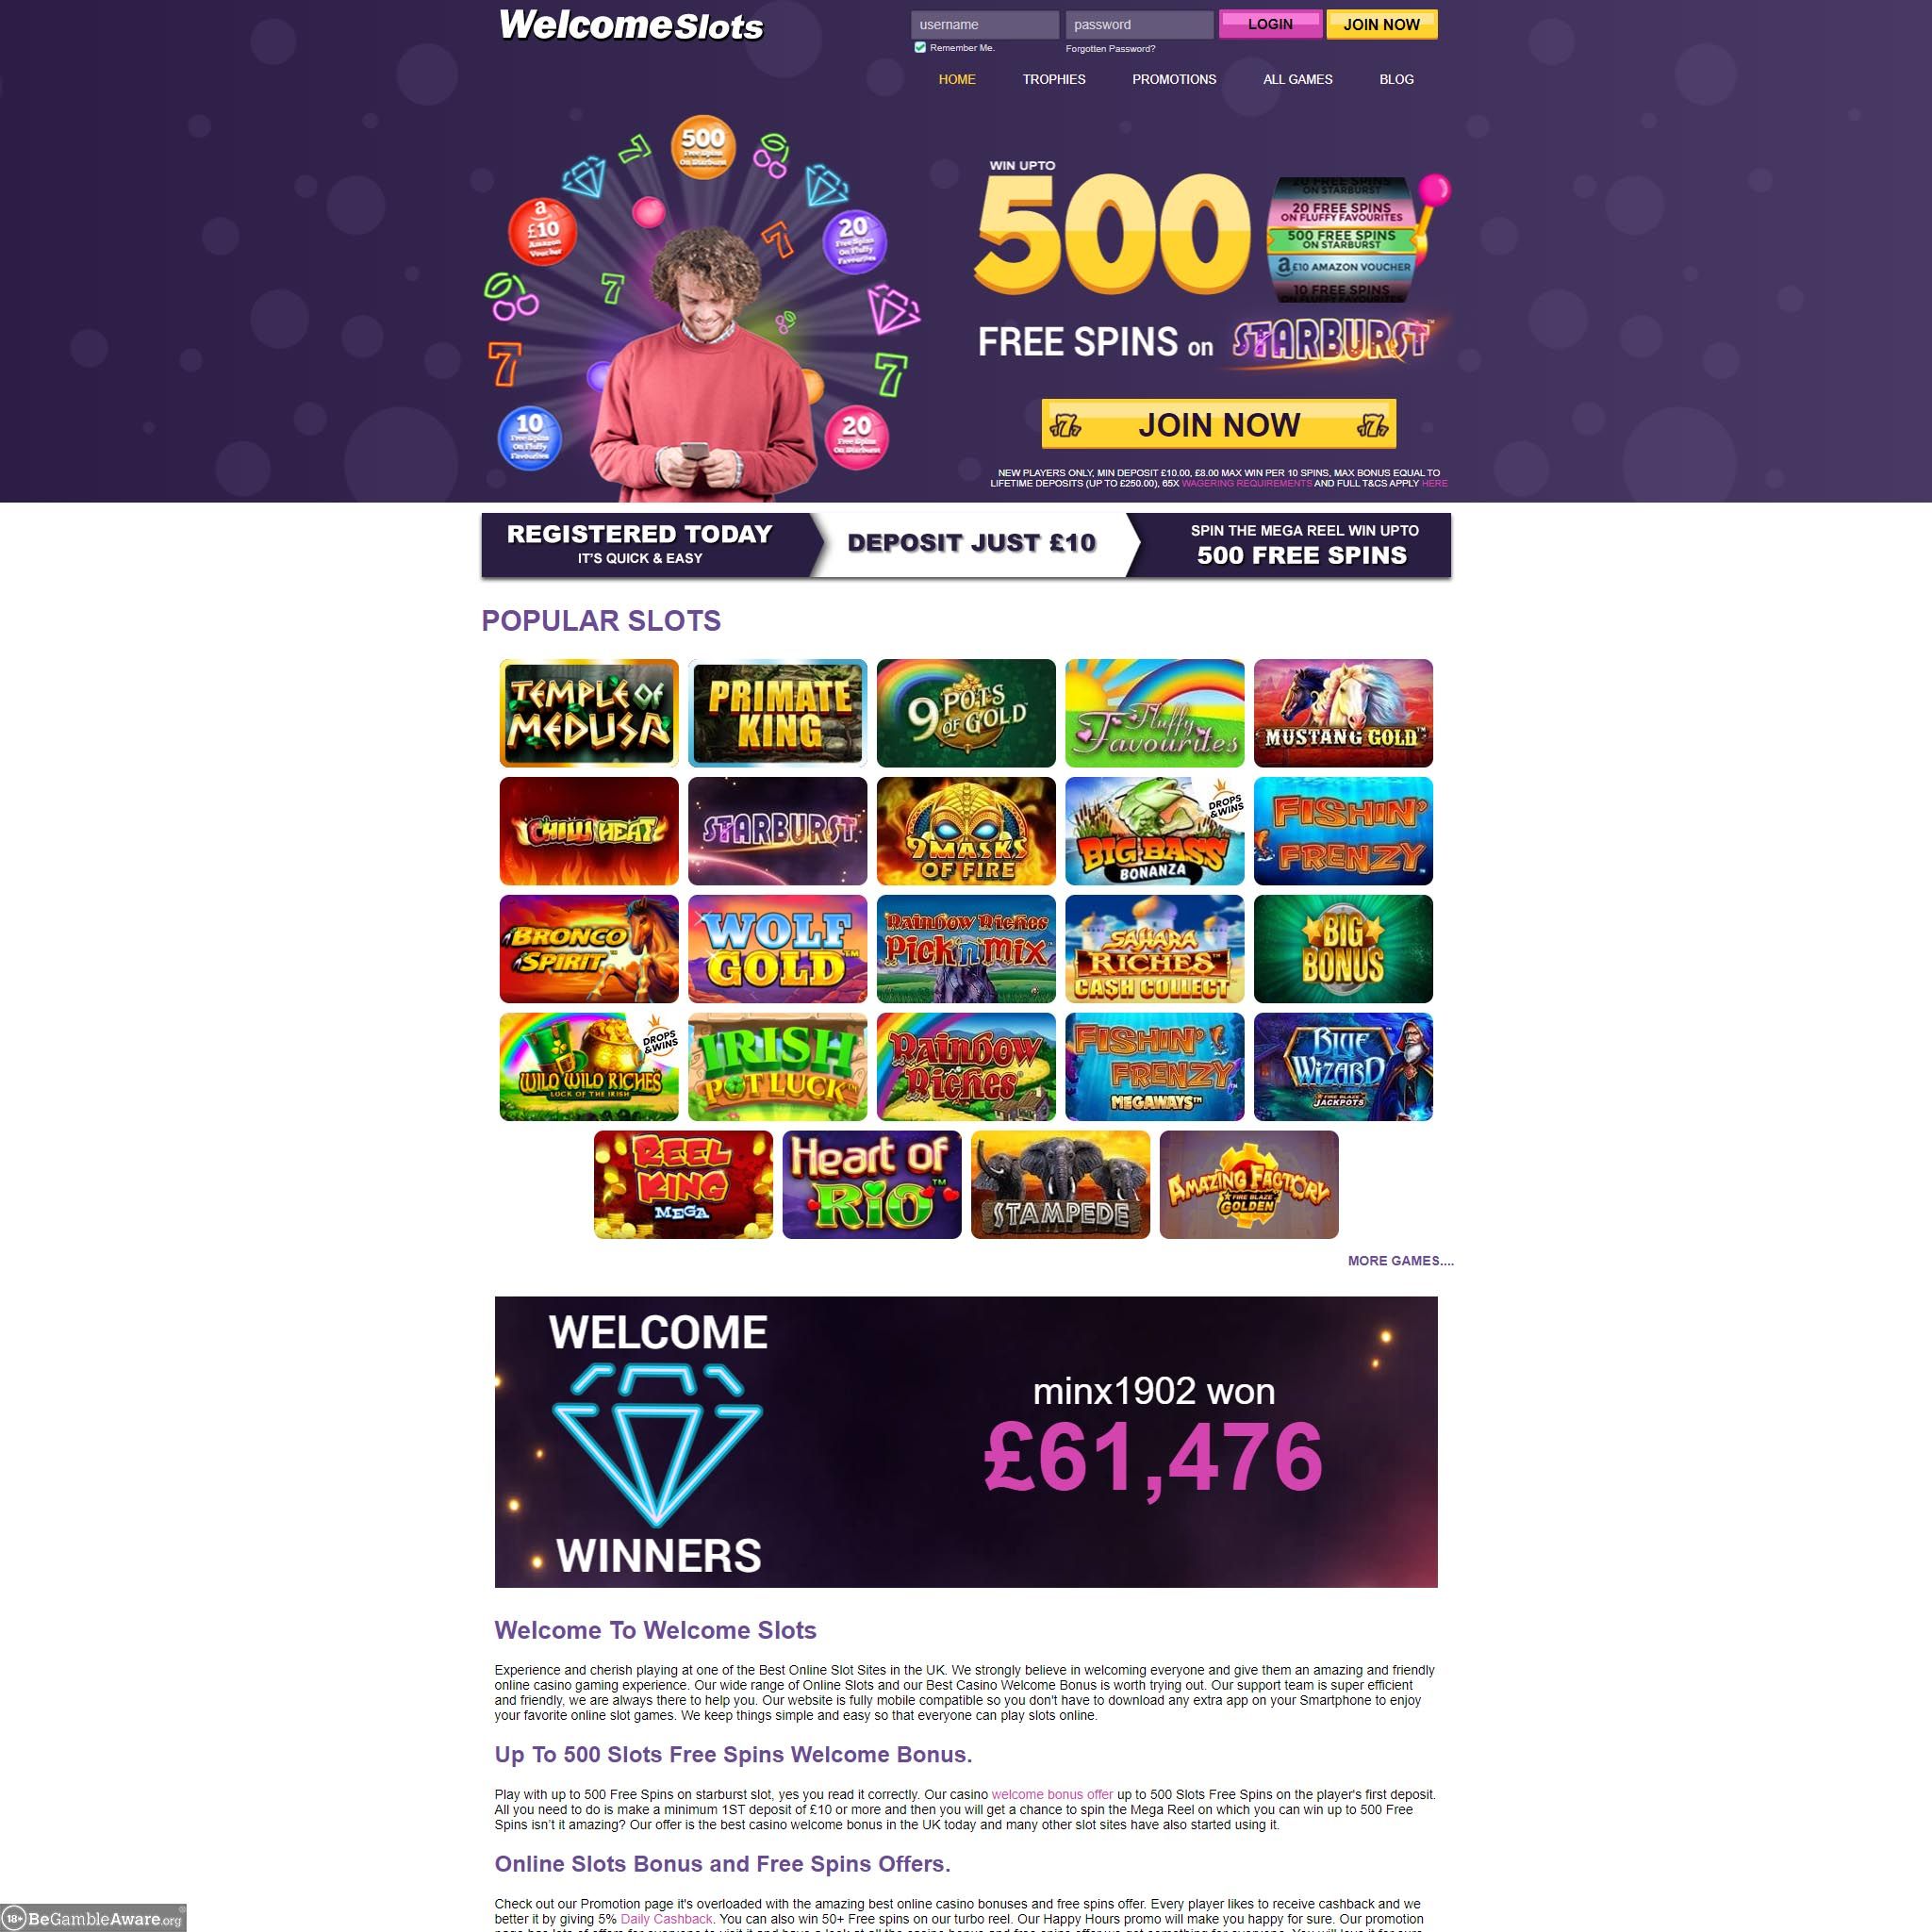 Welcome Slots Casino UK review by Mr. Gamble